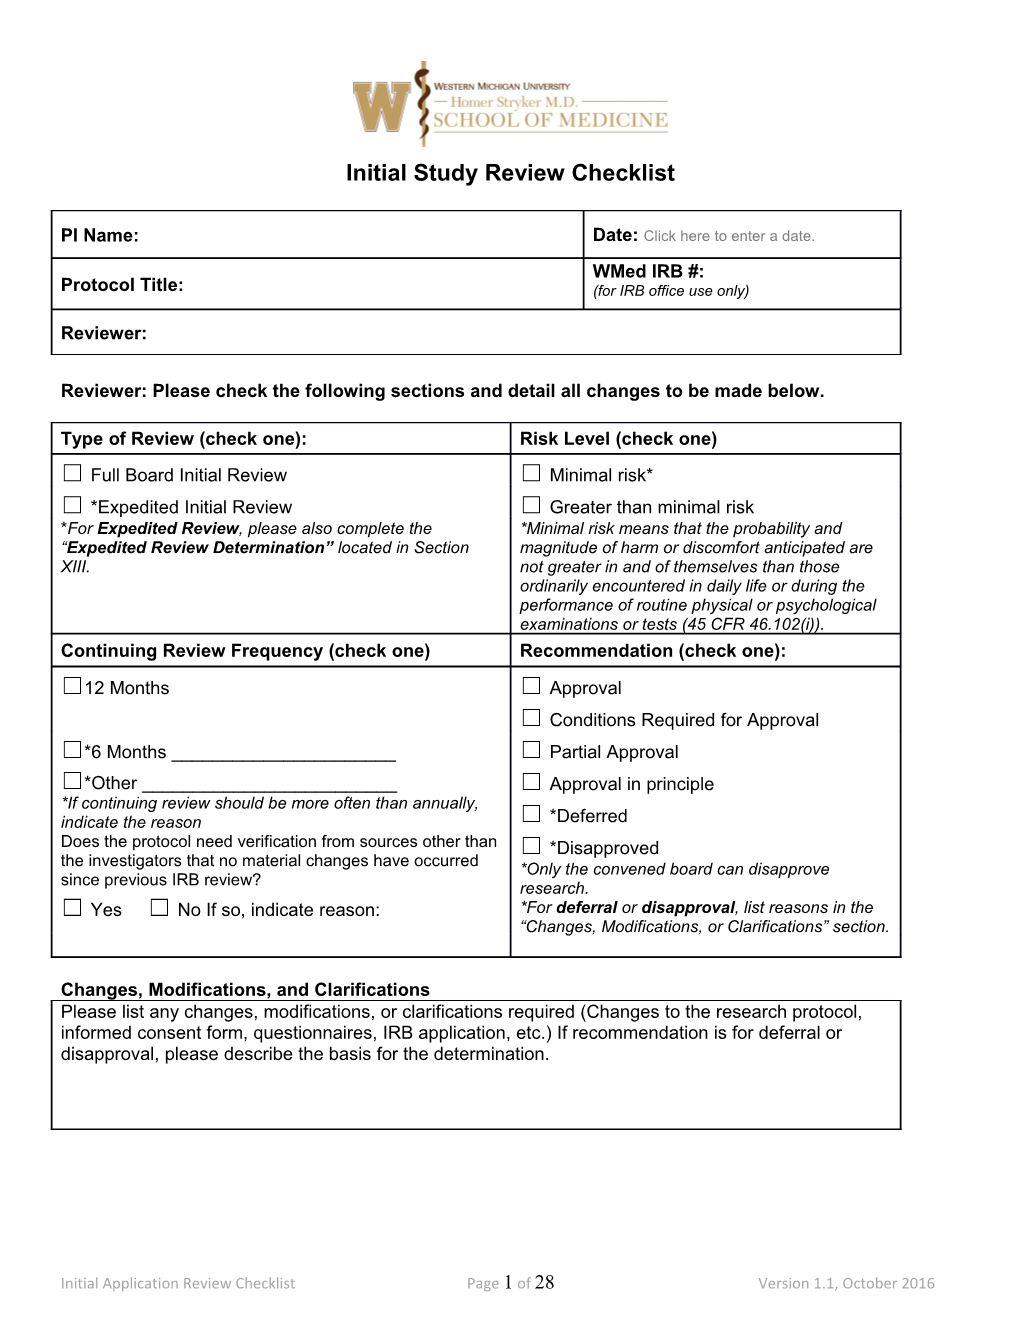 Initial Study Review Checklist